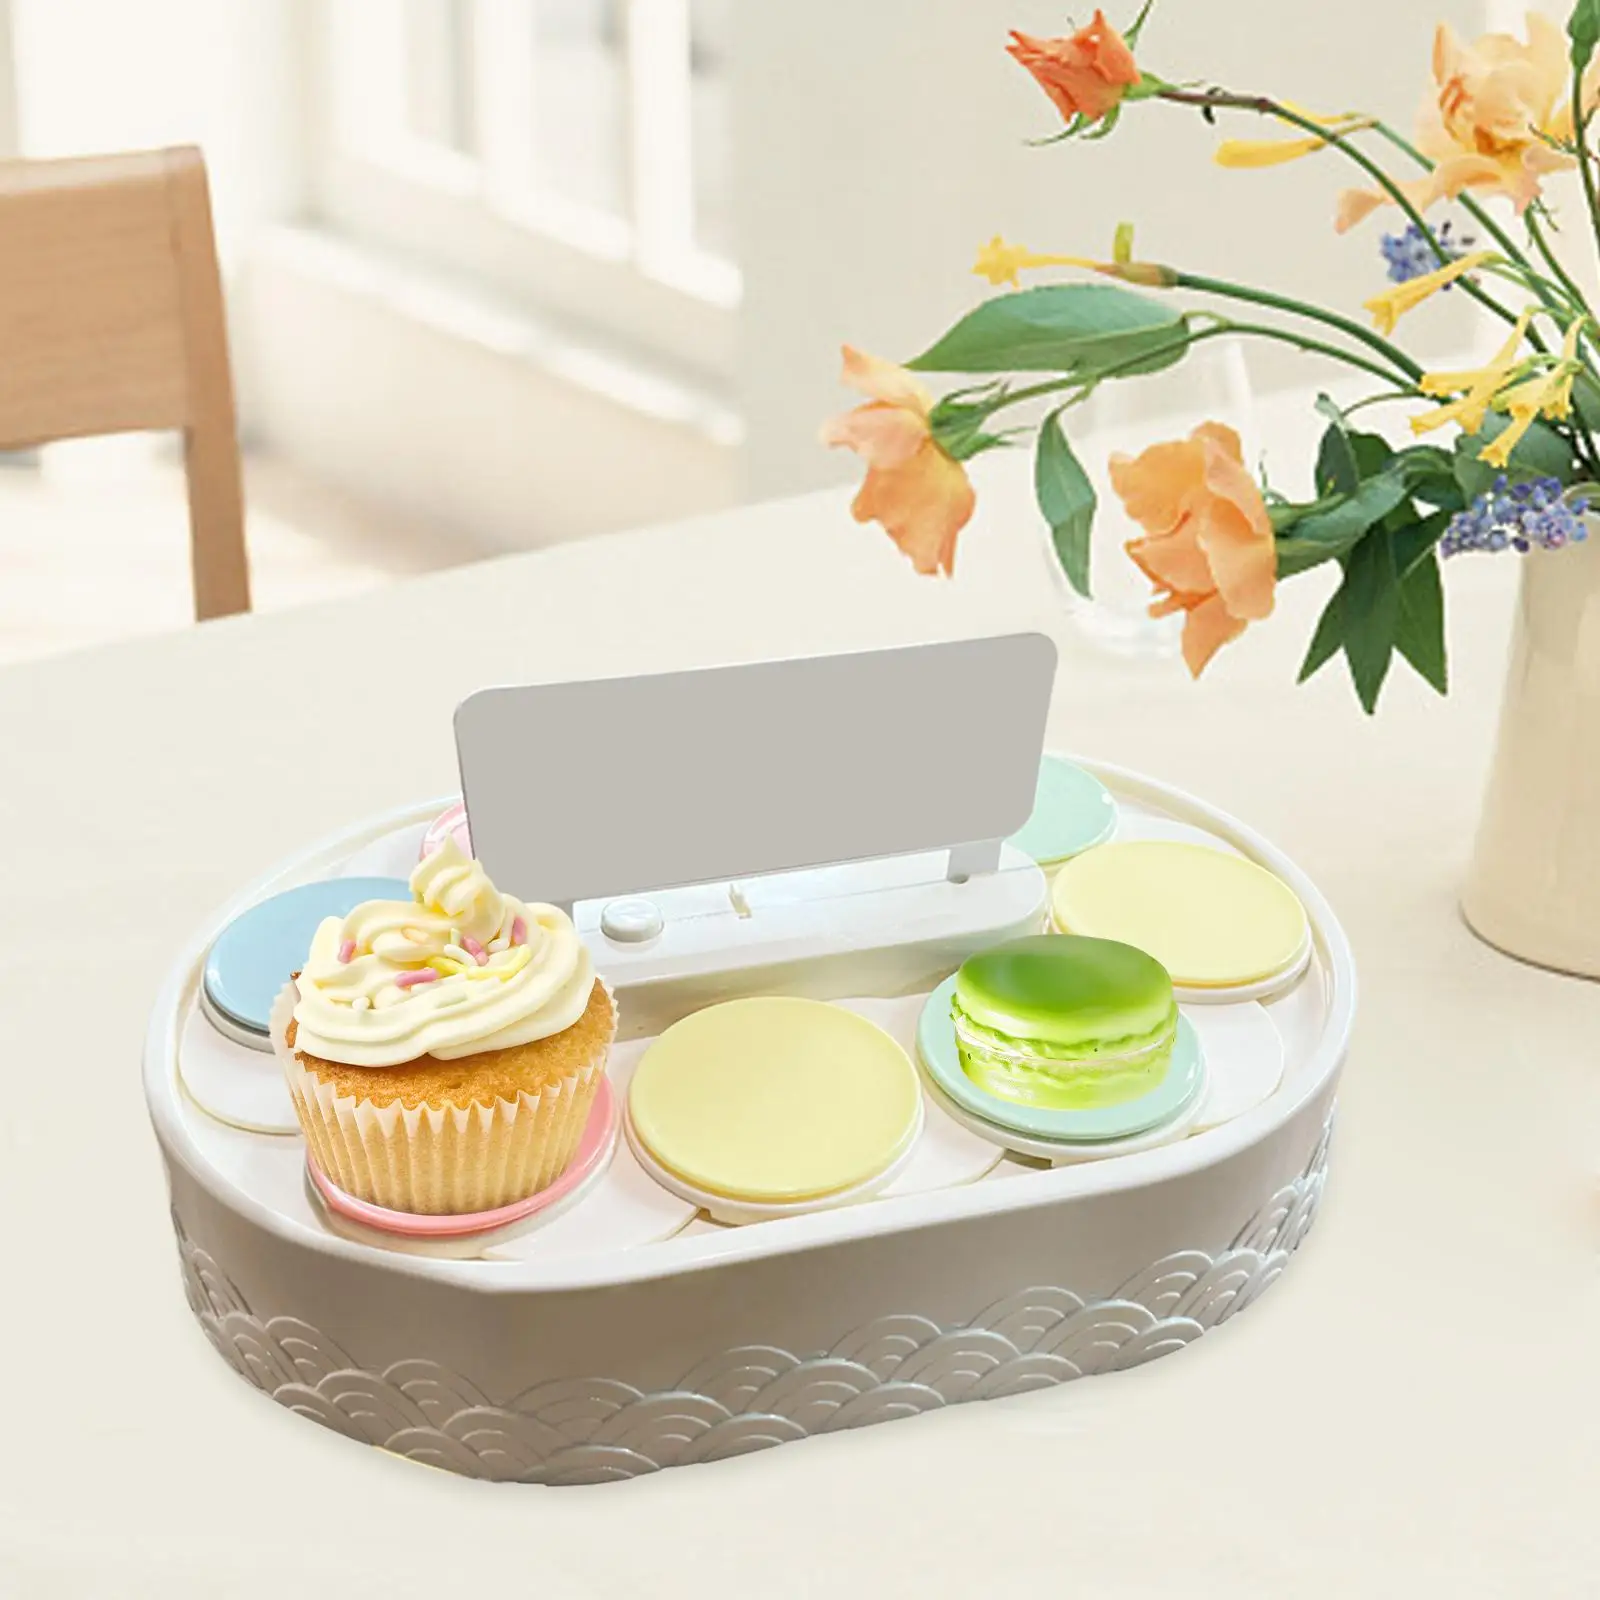 Automatic Rotating Plates Carousel Cupcake Holder for Banquet Jewelry Sushi